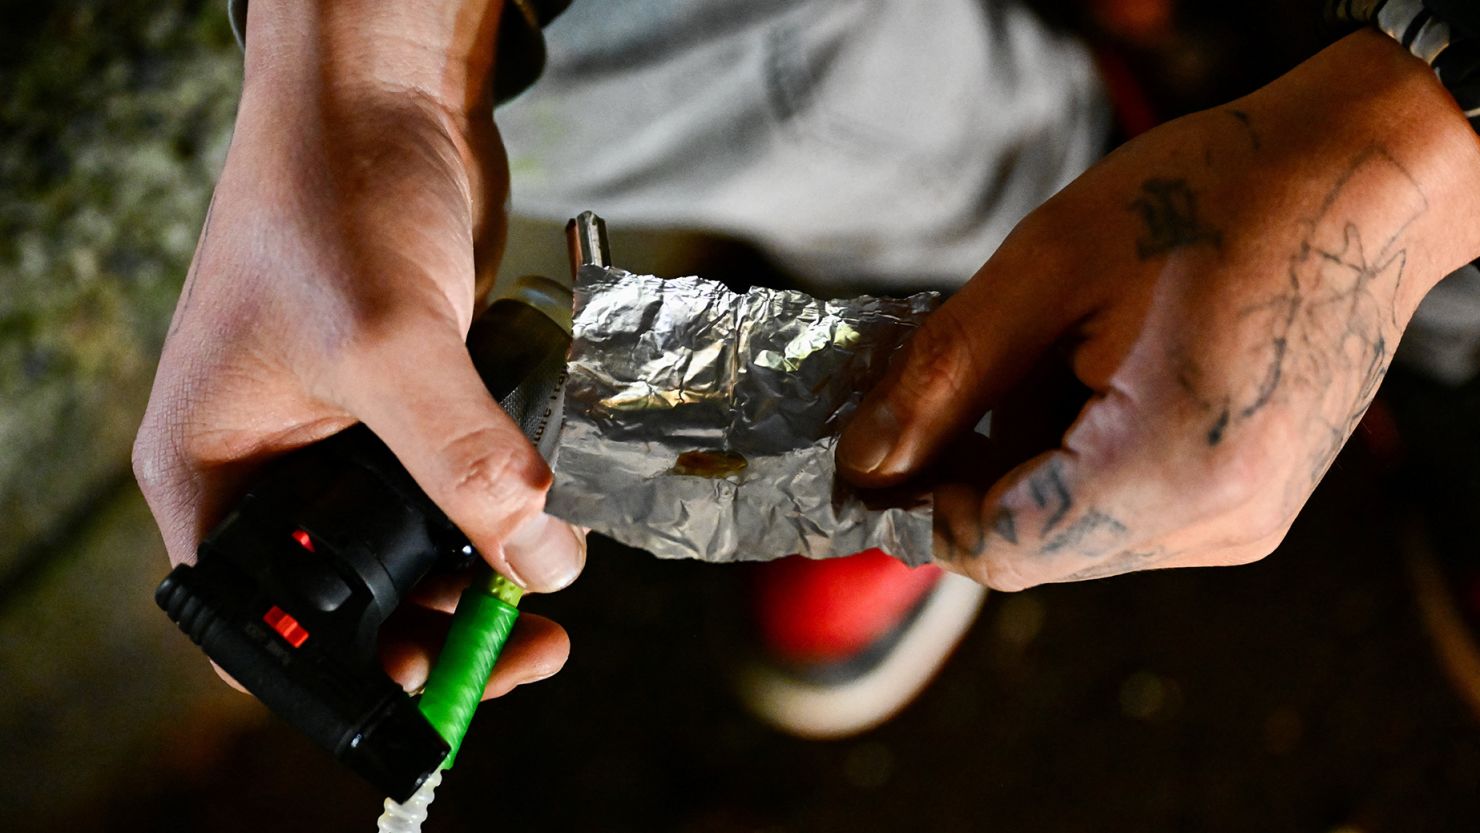 A person is using fentanyl on Park Avenue following the decriminalization of all drugs in downtown Portland, Oregon on January 23, 2024.